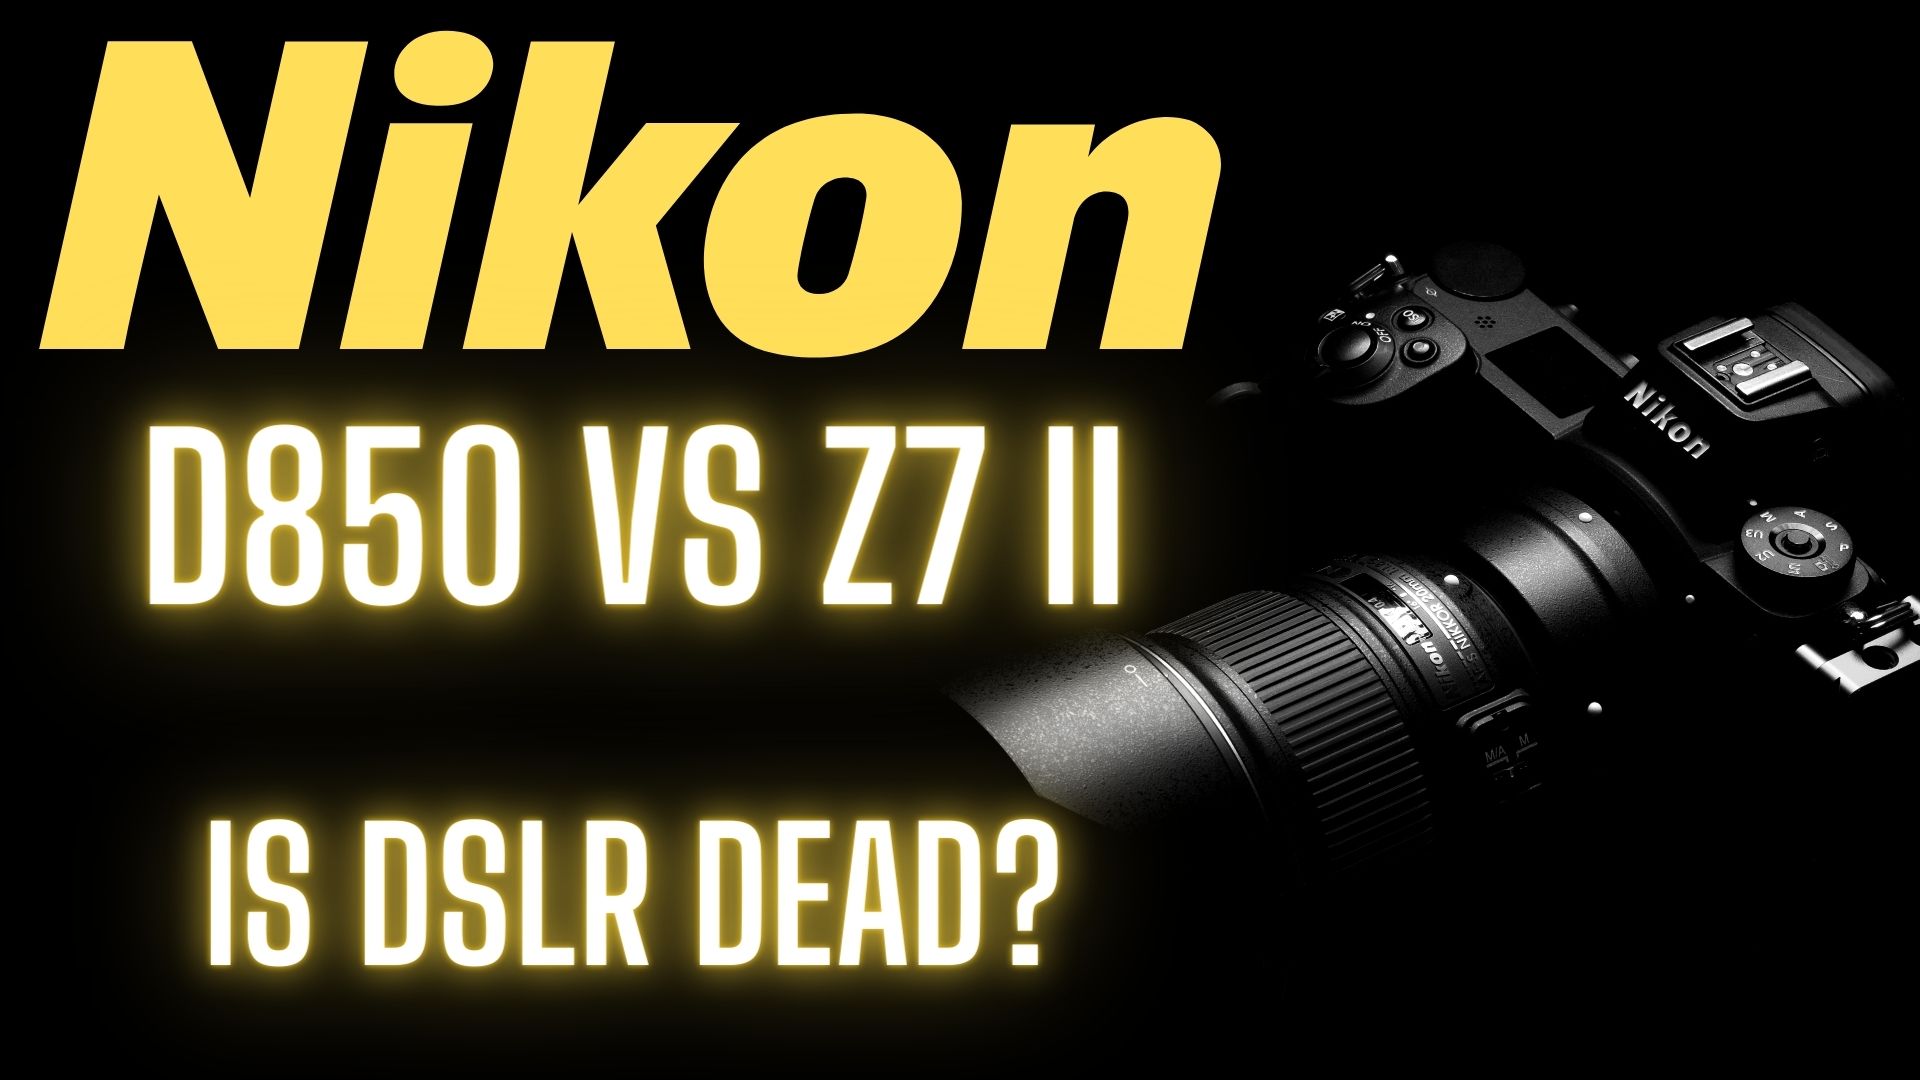 Nikon D850 vs Z7ii and which is the better camera?